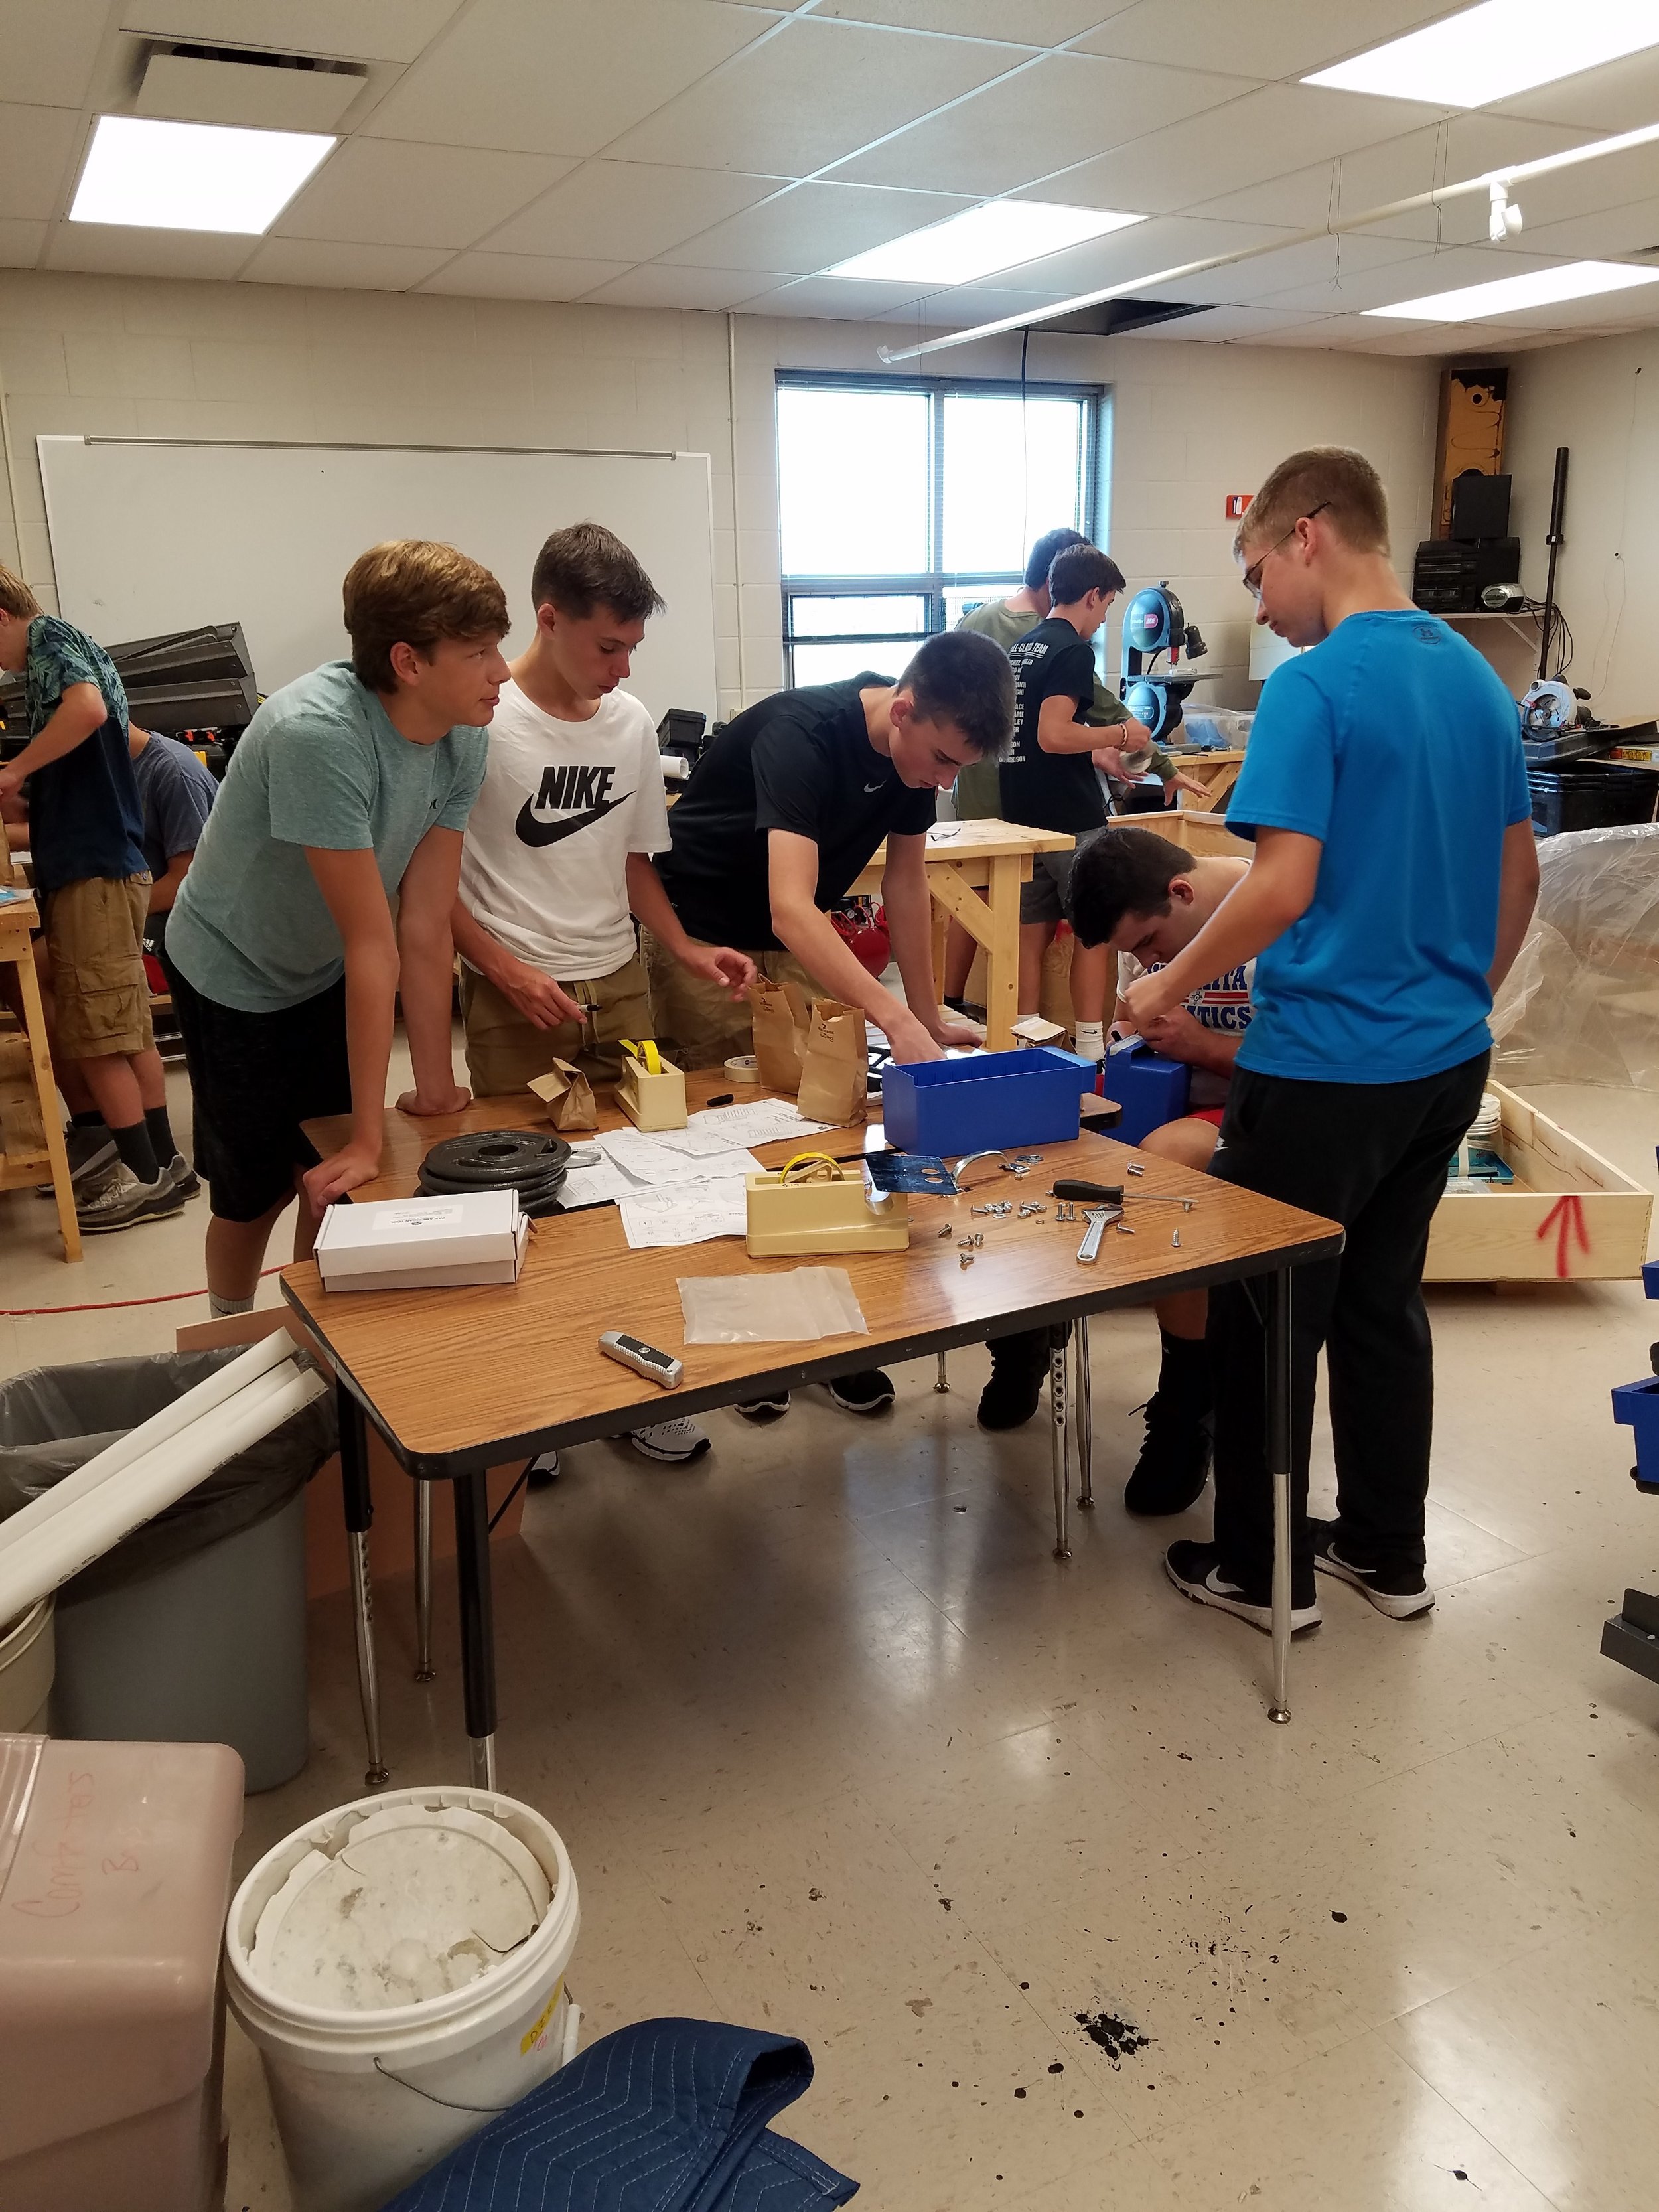 Engineering students work together on a project.